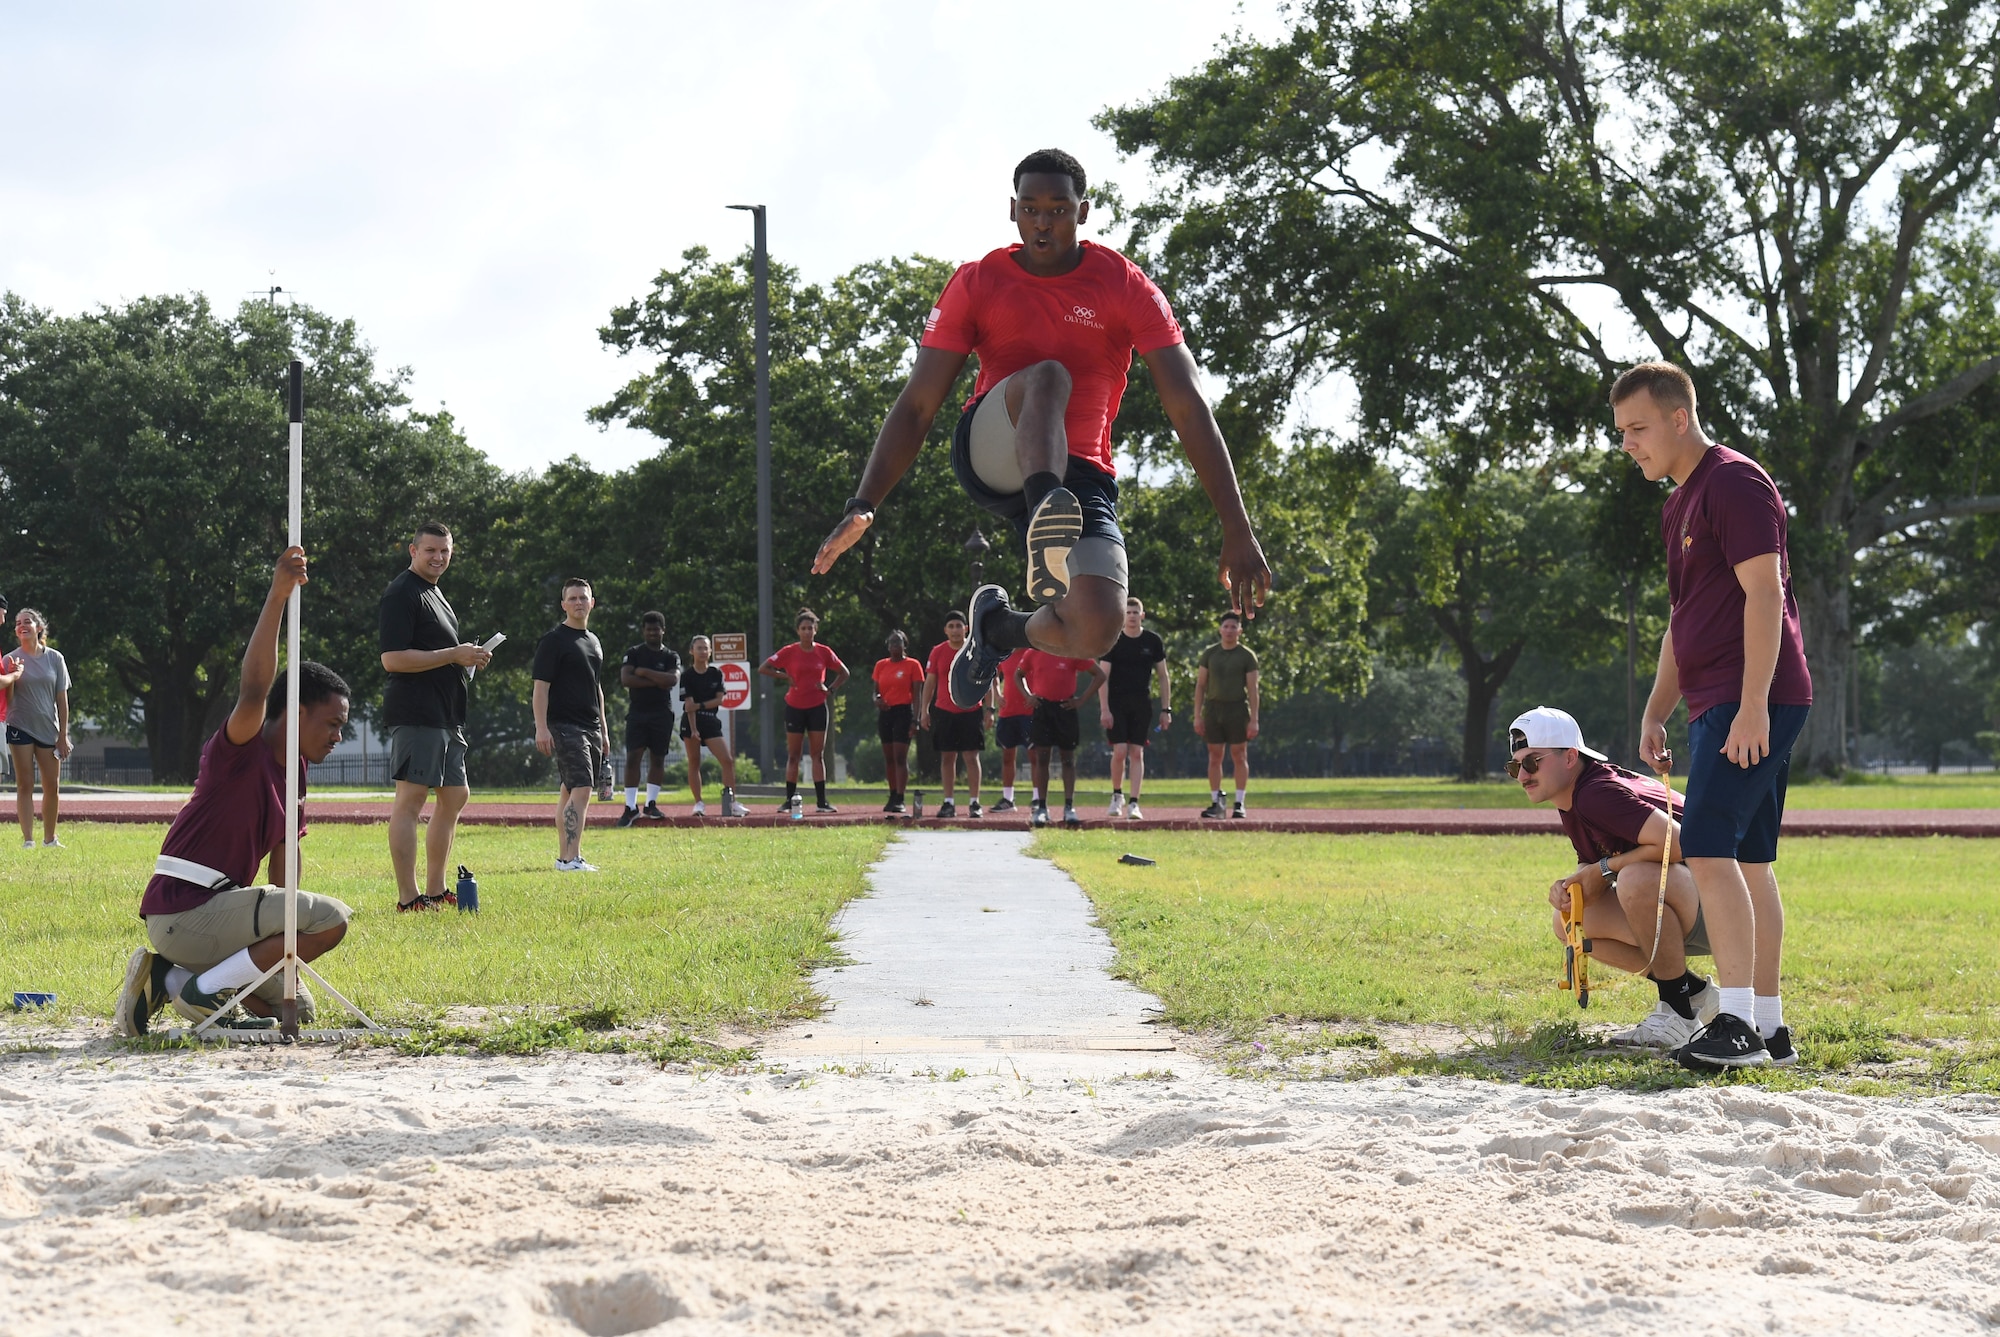 U.S. Air Force Airman 1st Class McLee Emile, 336th Training Squadron student, participates in long jump during the 81st Training Group Olympics at Keesler Air Force Base, Mississippi, June 11, 2021. The event also included competitions in weight lifting, track, shot put and discus. (U.S. Air Force photo by Kemberly Groue)